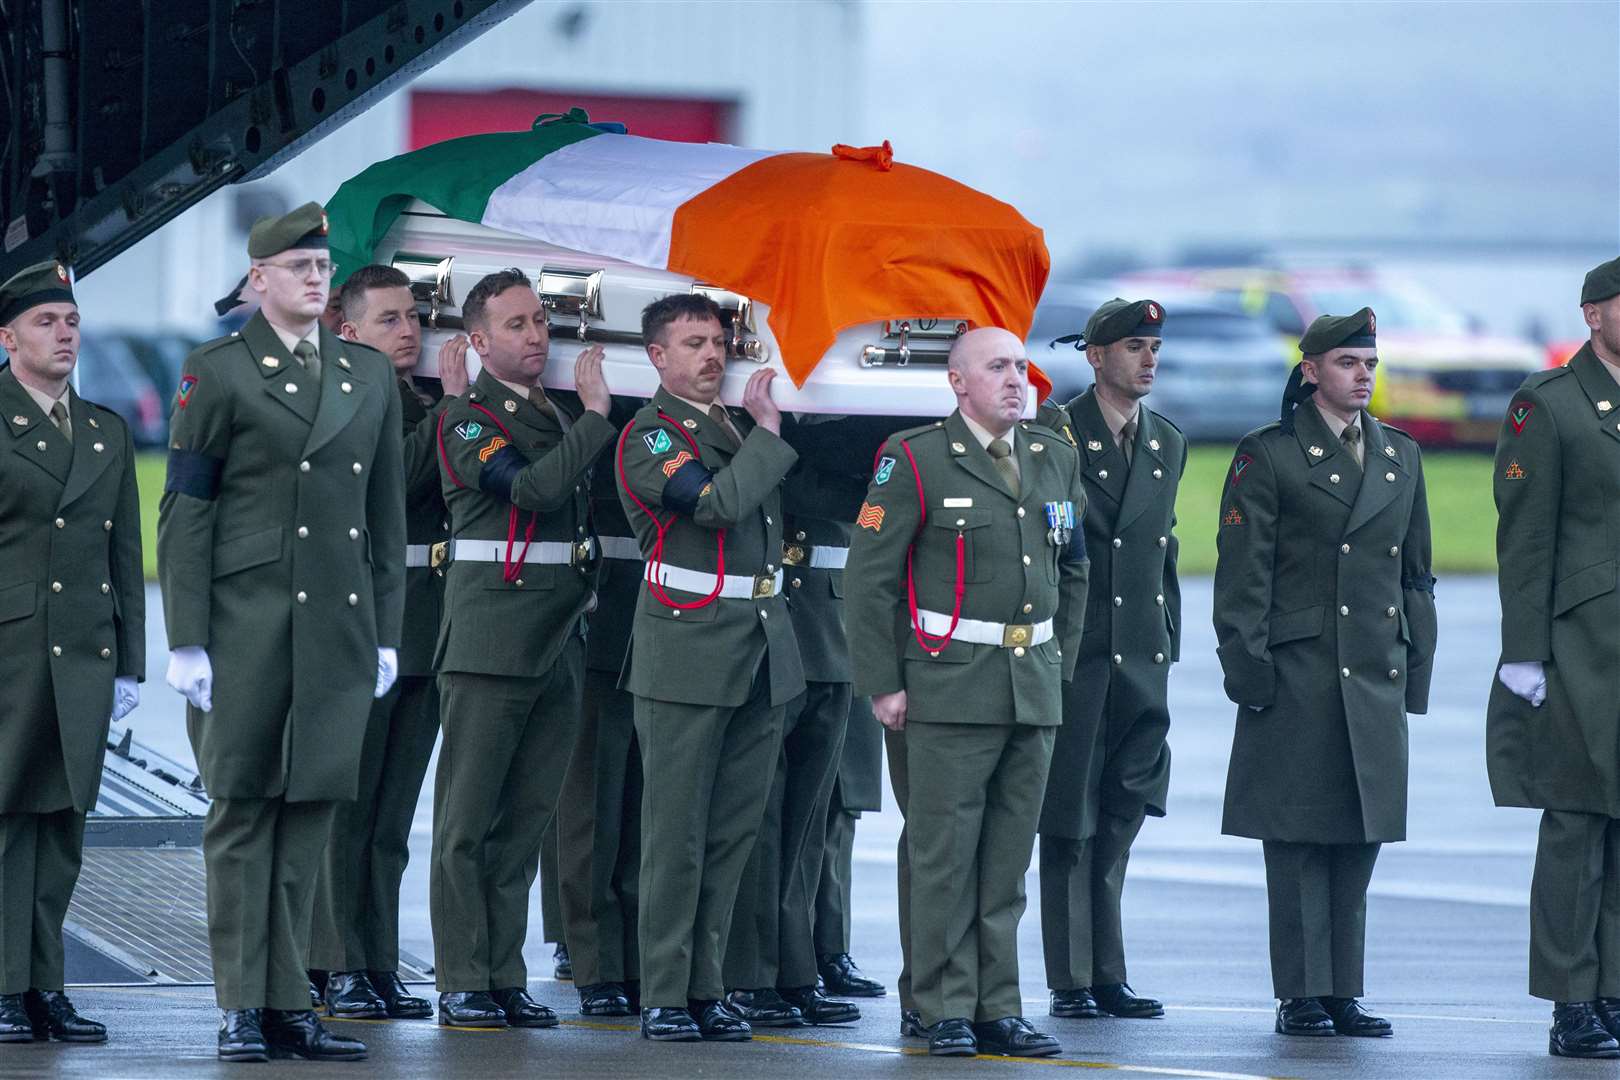 The body of Irish UN peacekeeping soldier Sean Rooney arriving at Casement Aerodrome, Baldonnel, on the outskirts of Dublin after being repatriated from Lebanon (Tom Honan/PA)